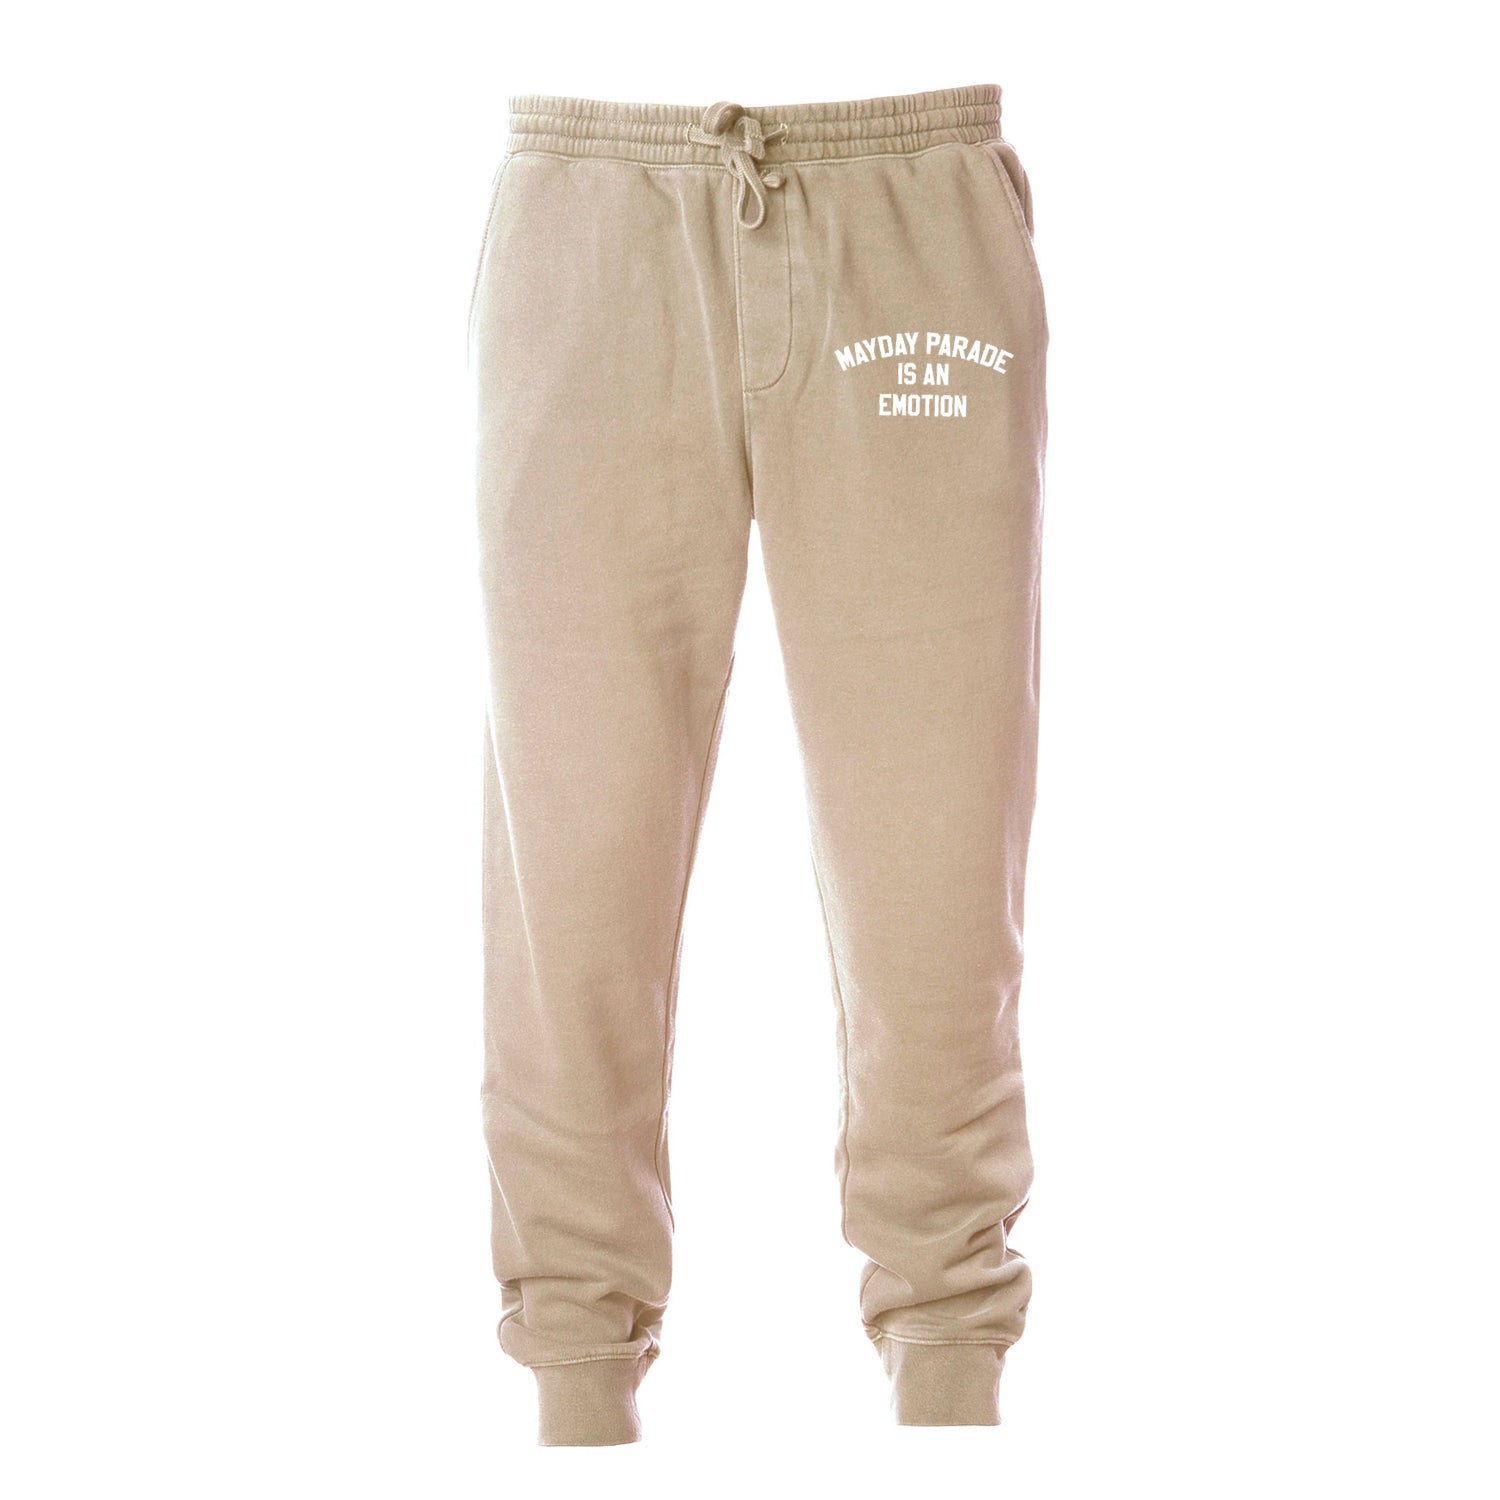 image of tan jogger sweatpants on a white background. joggers have a tied drawstring around the elastic waist and a small print at the top right next to the pocket in white that says mayday parade is an emotion